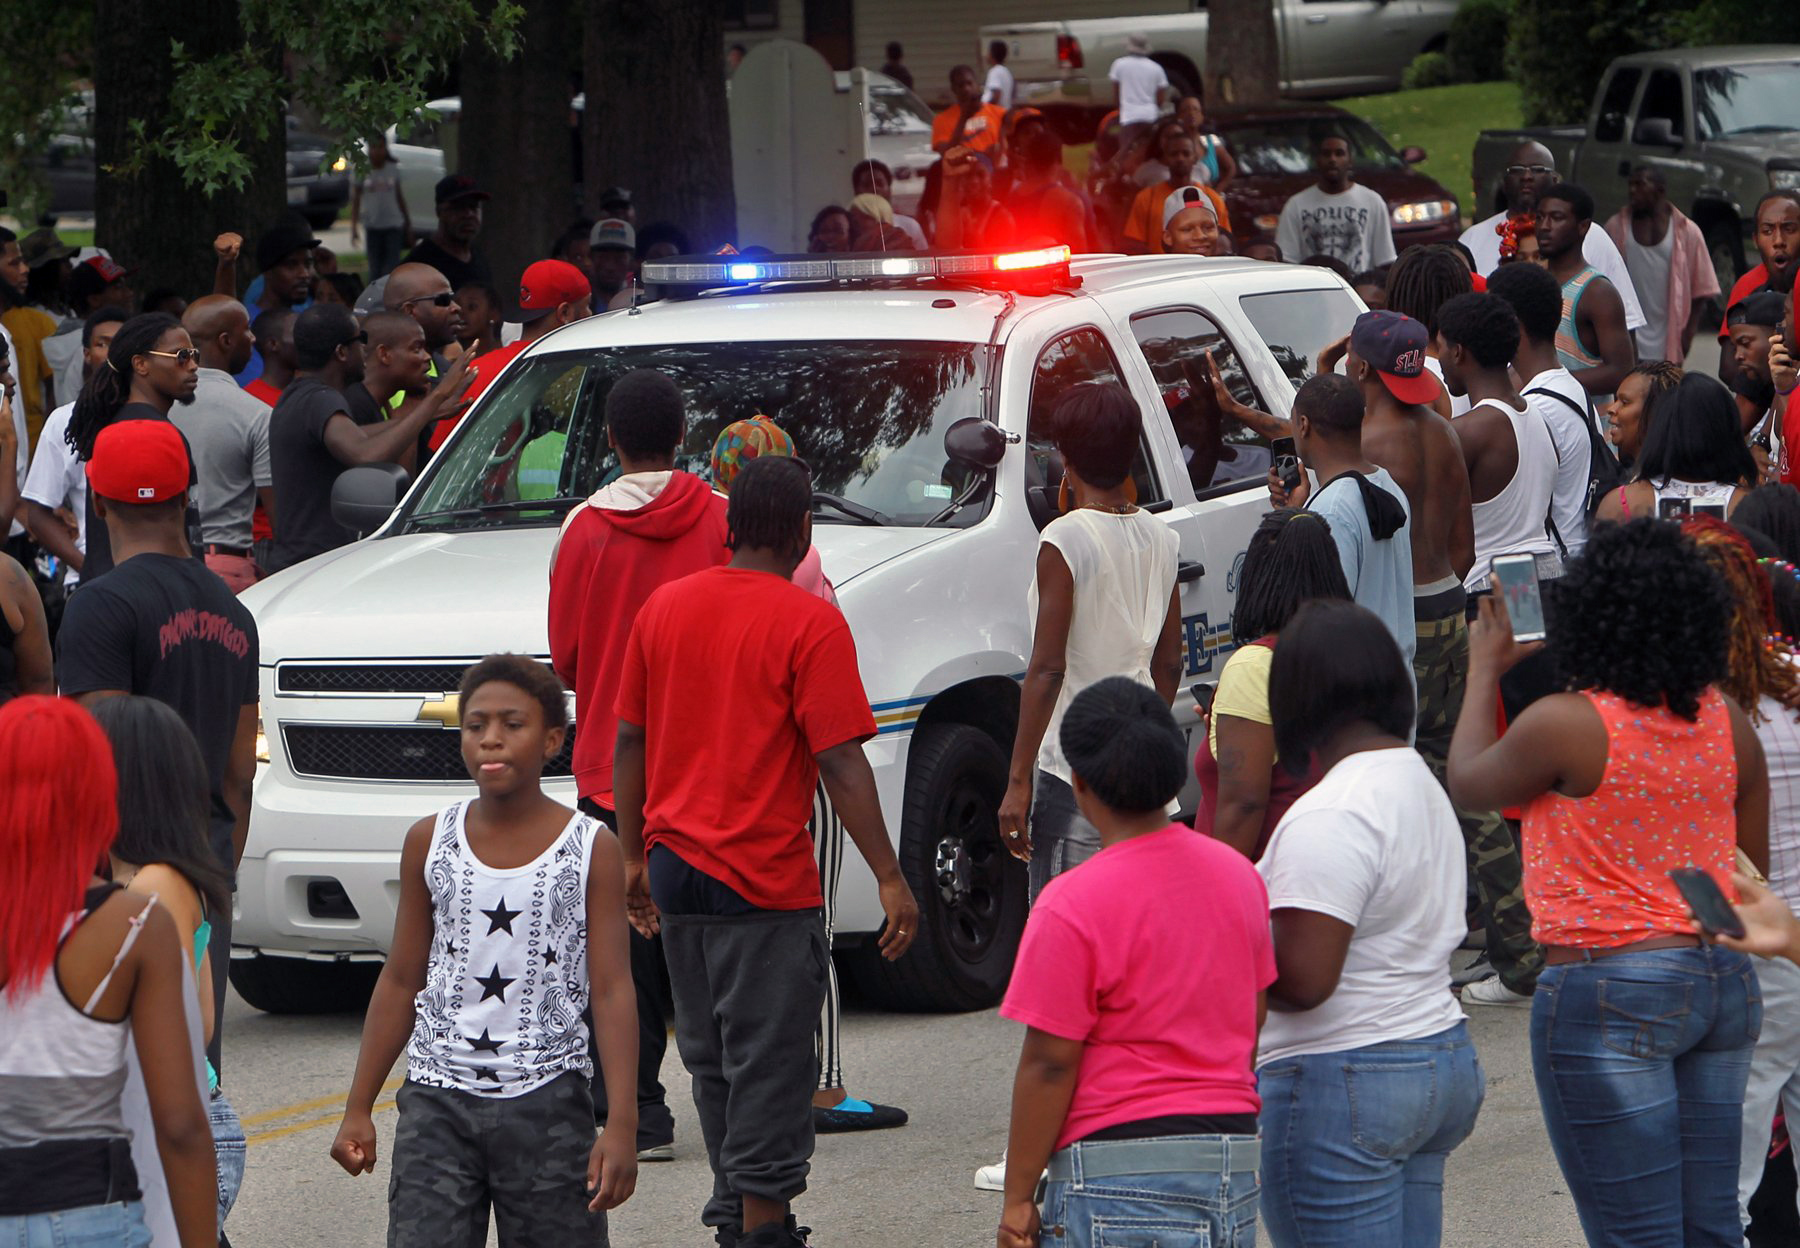 PHOTO: Protesters bang on the side of a police car, Aug. 10, 2014, in Ferguson, Mo.